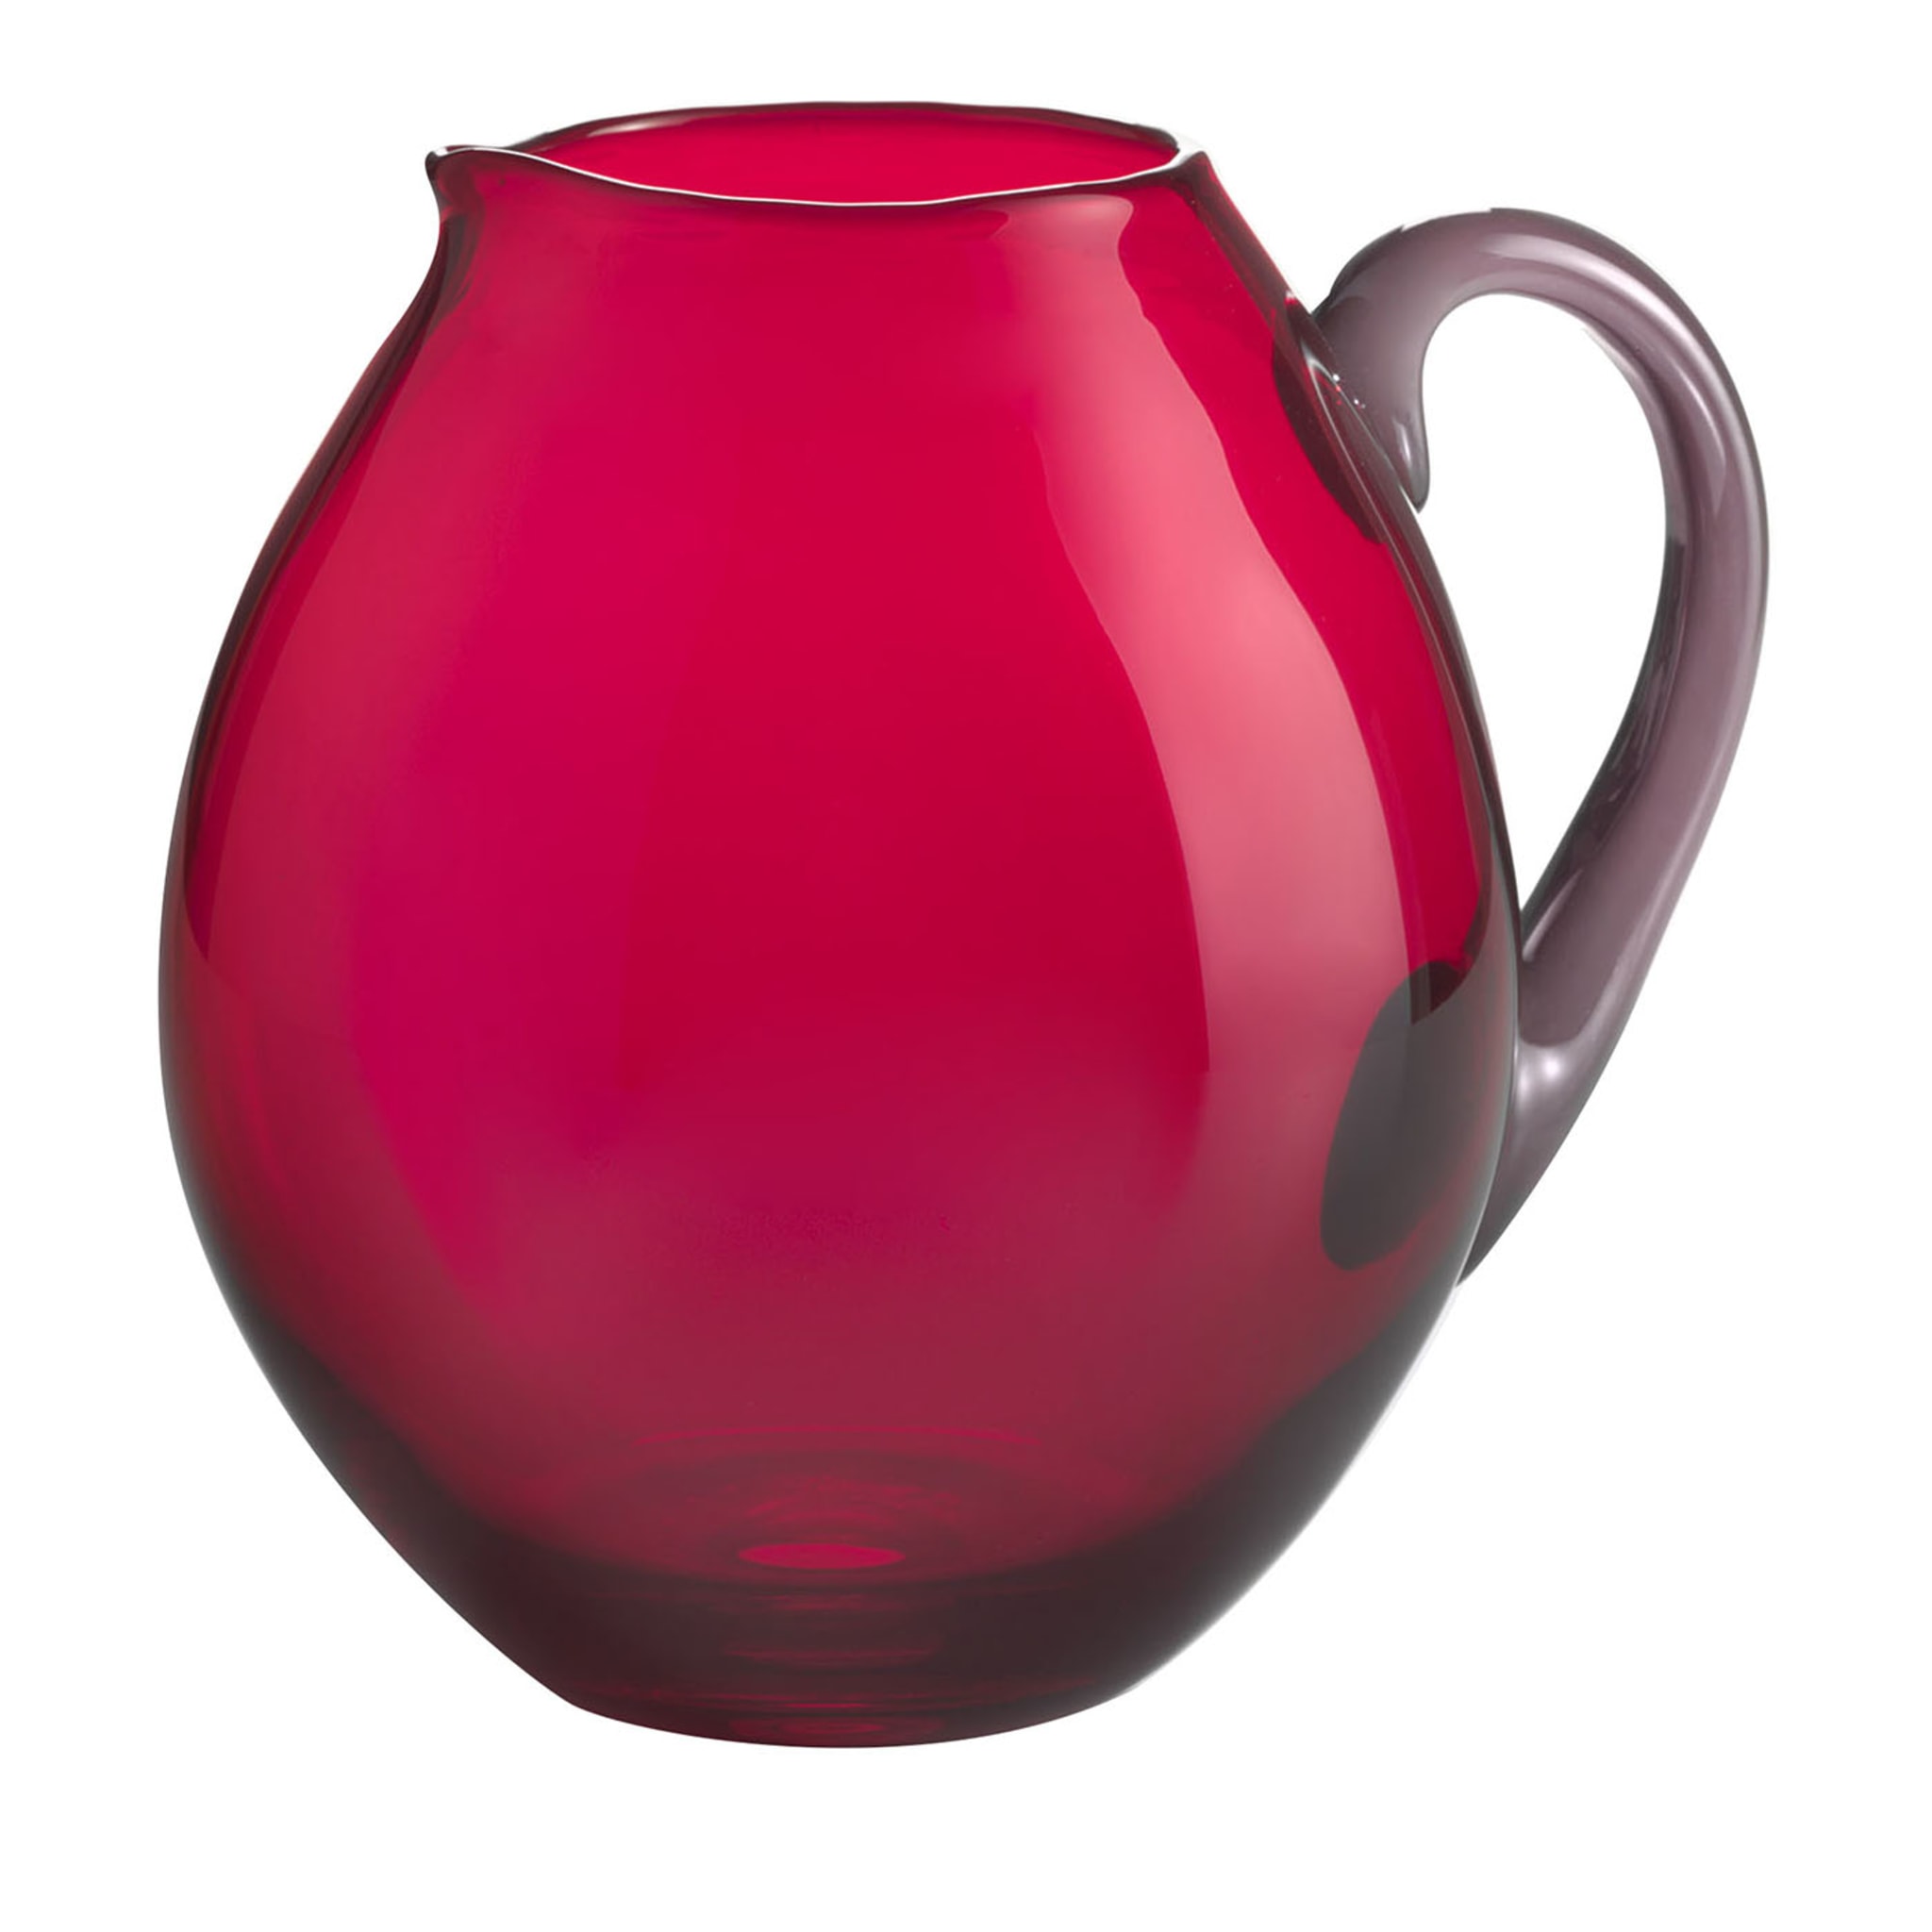 Dandy Red & Blueberry Pitcher by Stefano Marcato - Main view